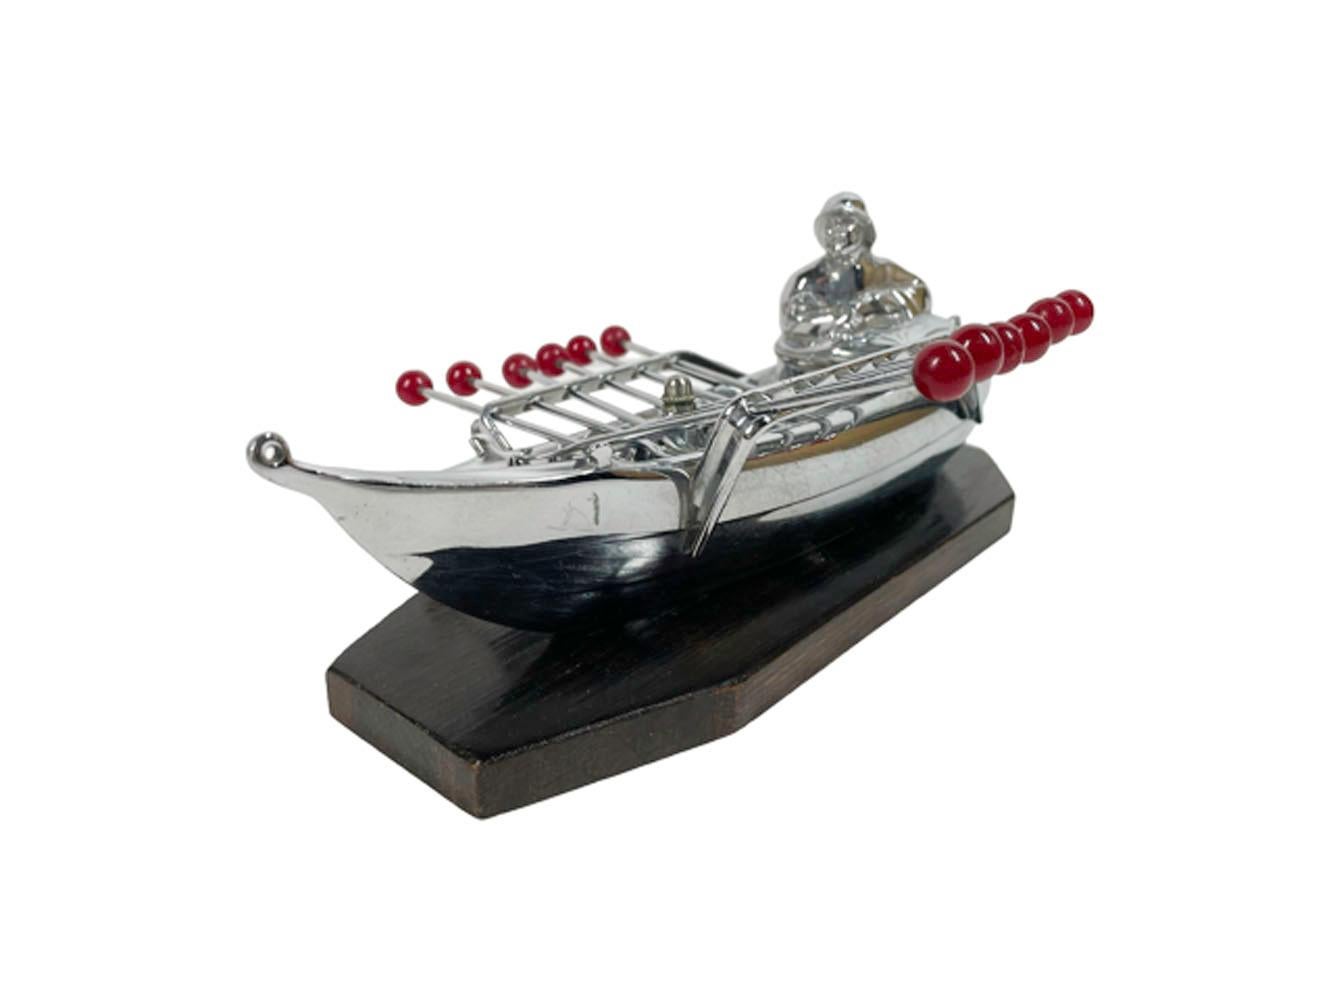 Art Deco chromed cast metal cocktail pick holder in the form of a man wearing foul weather gear in a small boat with perforated rails holding 12 forked picks with red ball ends and all set on a wood base.